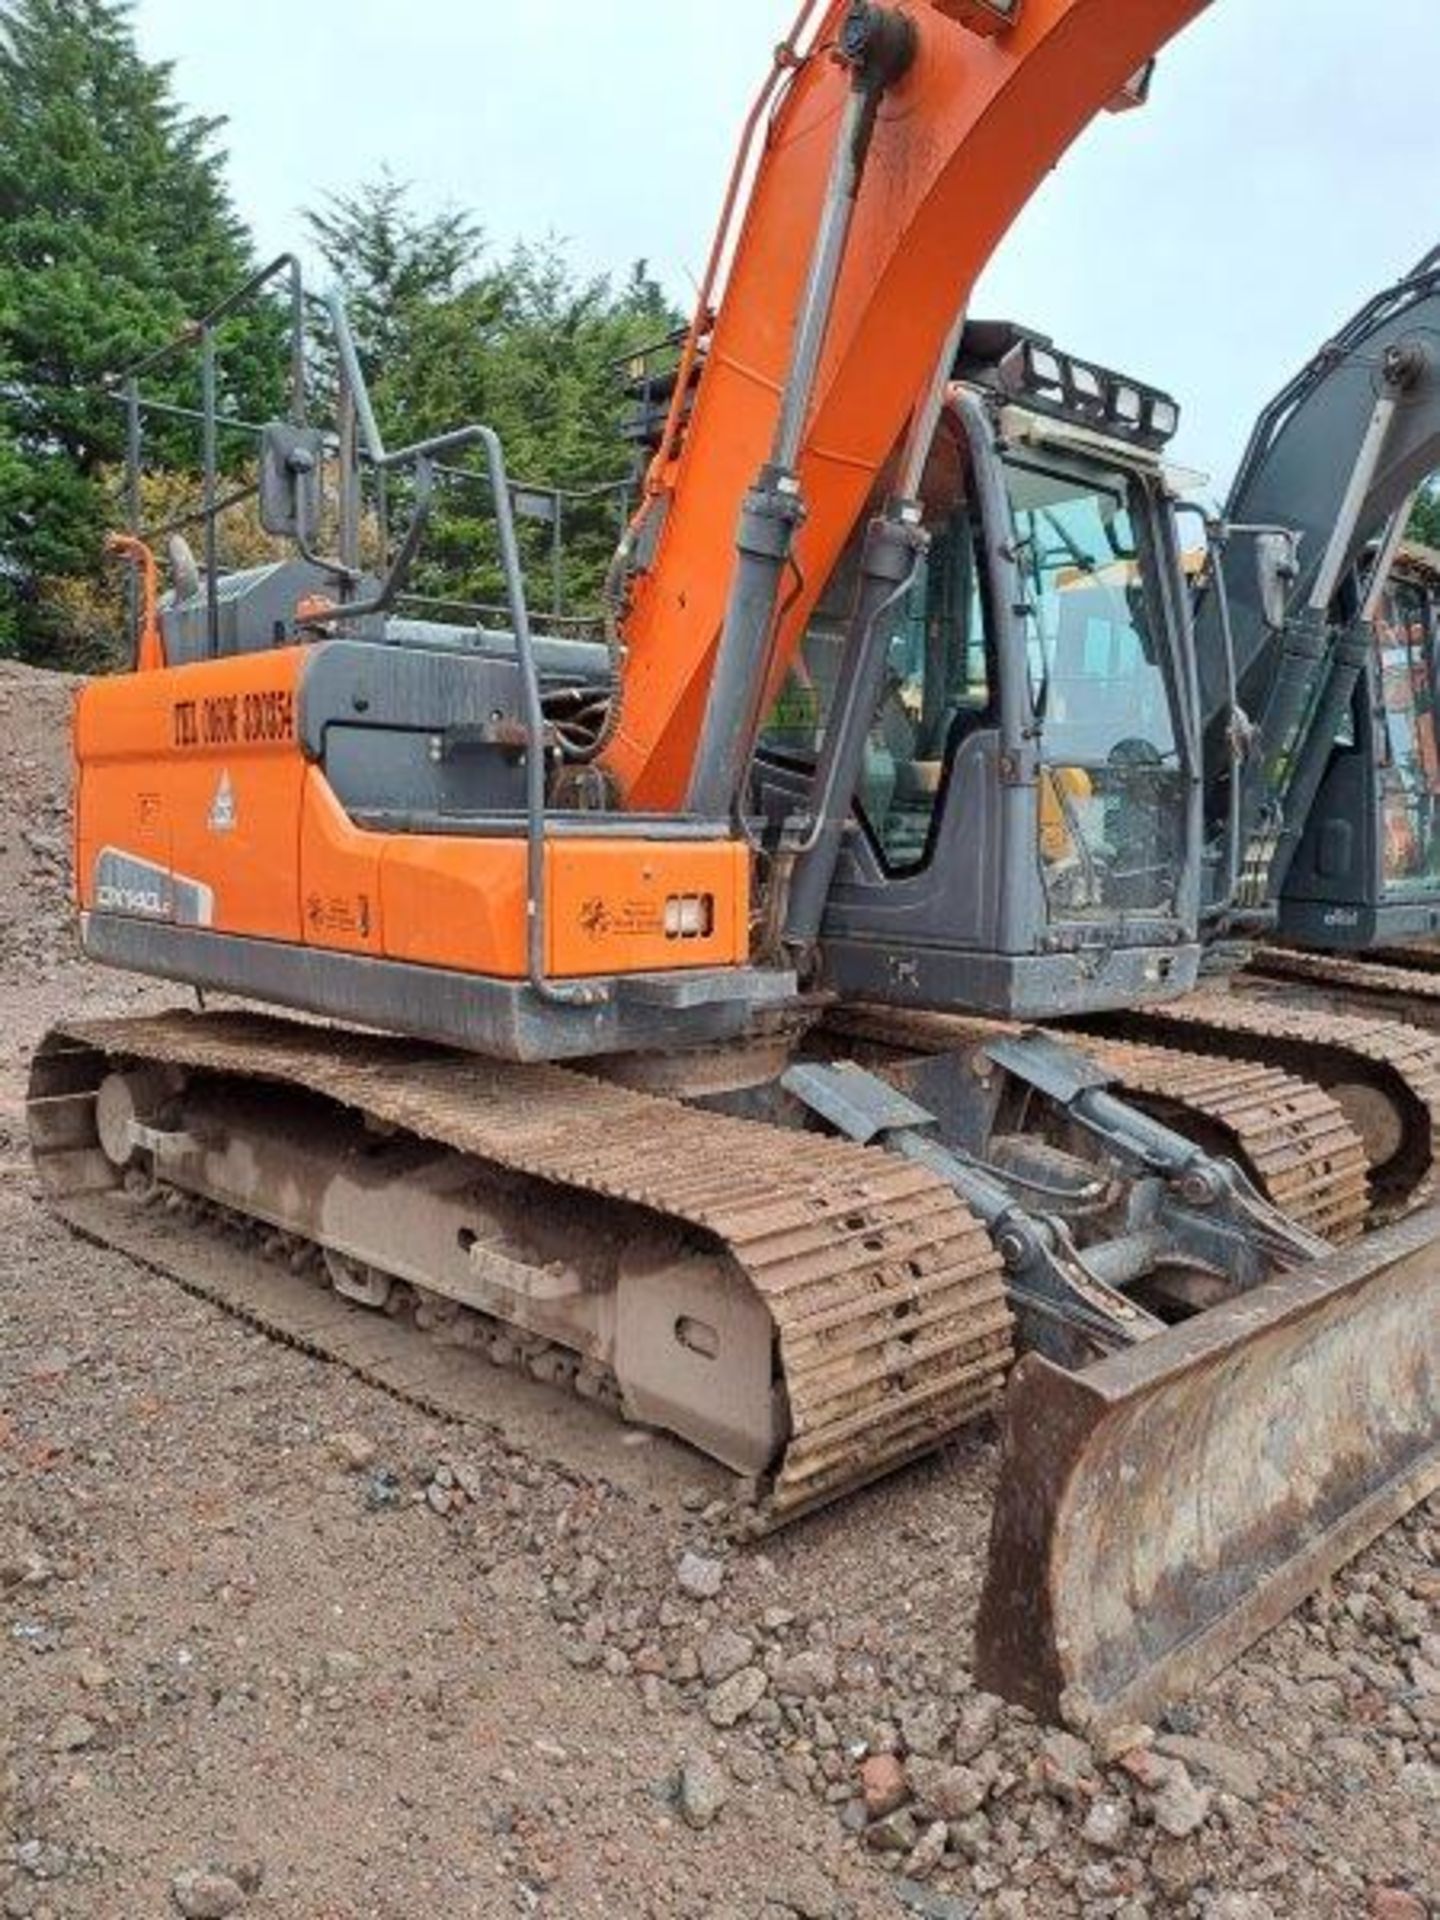 Doosan DX140LC-5 14t excavator, serial no. DHKCEBBRCG0001308, Year: 2017, Hours: 6,670, Key: 1, with - Image 13 of 21